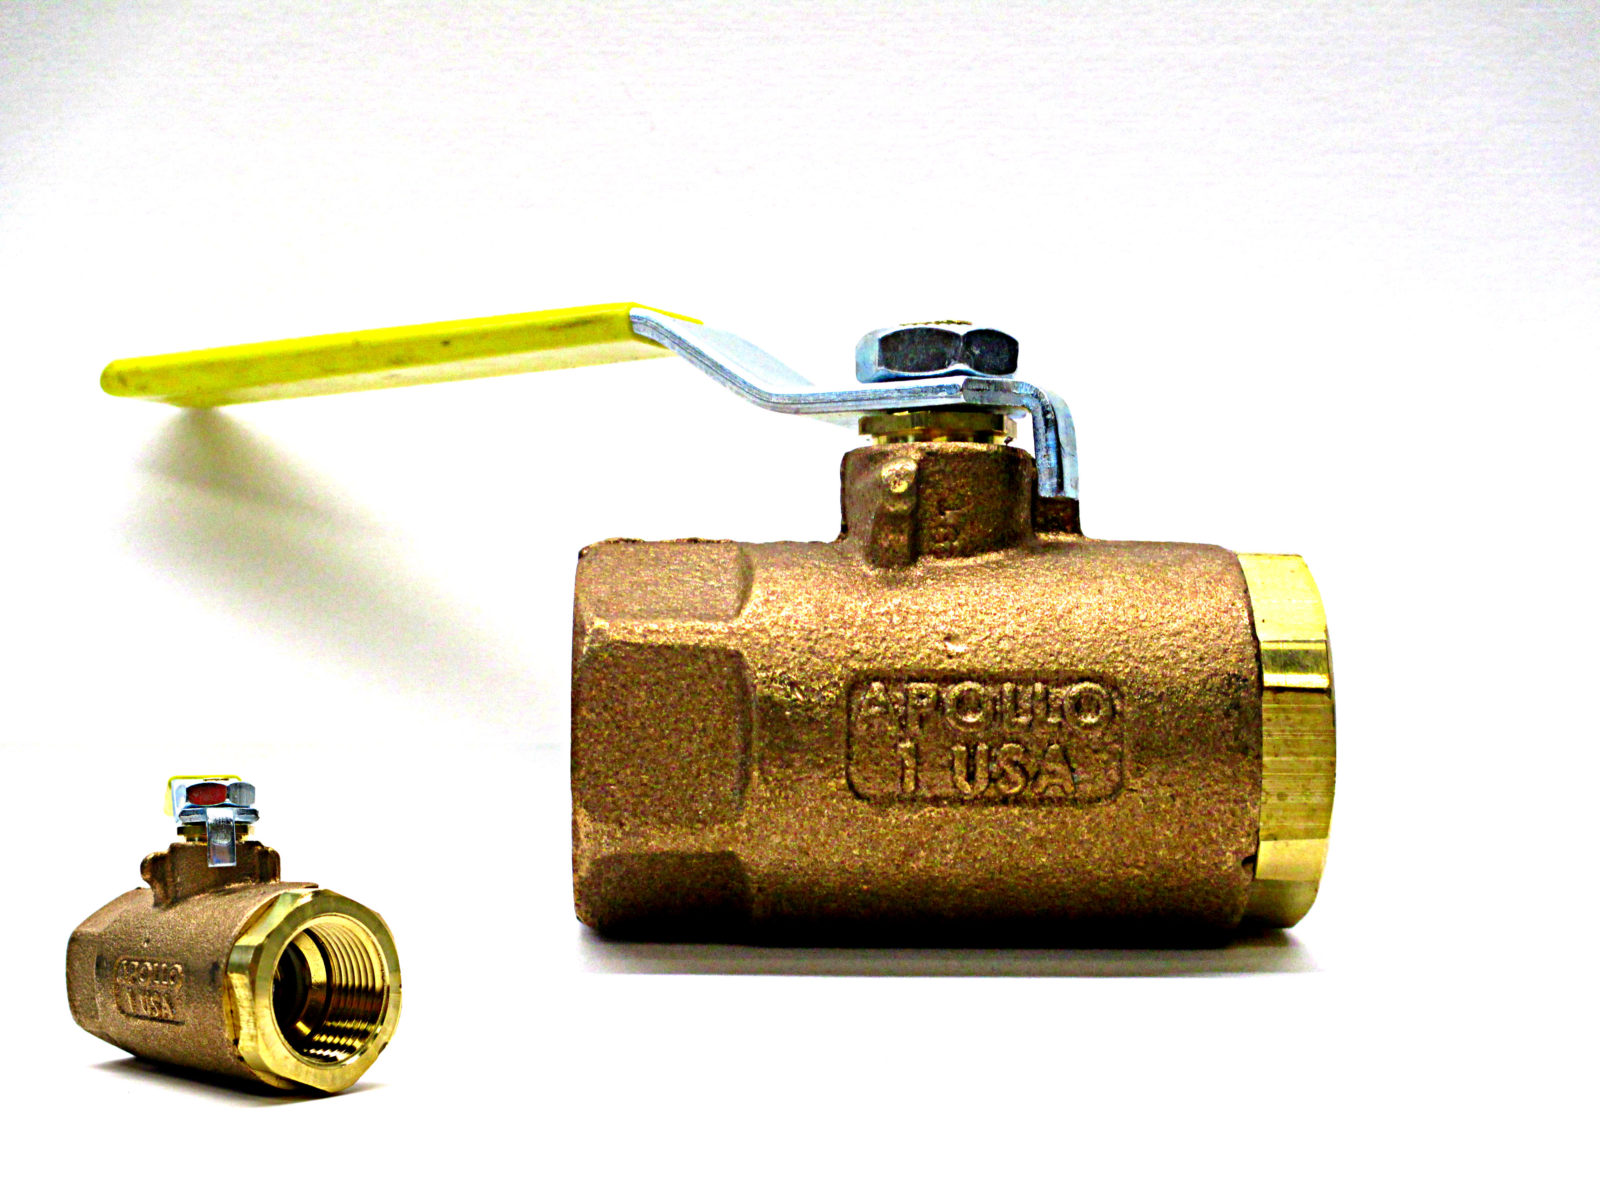 How to Locate & Turn Off Main Water Shut-Off Valves